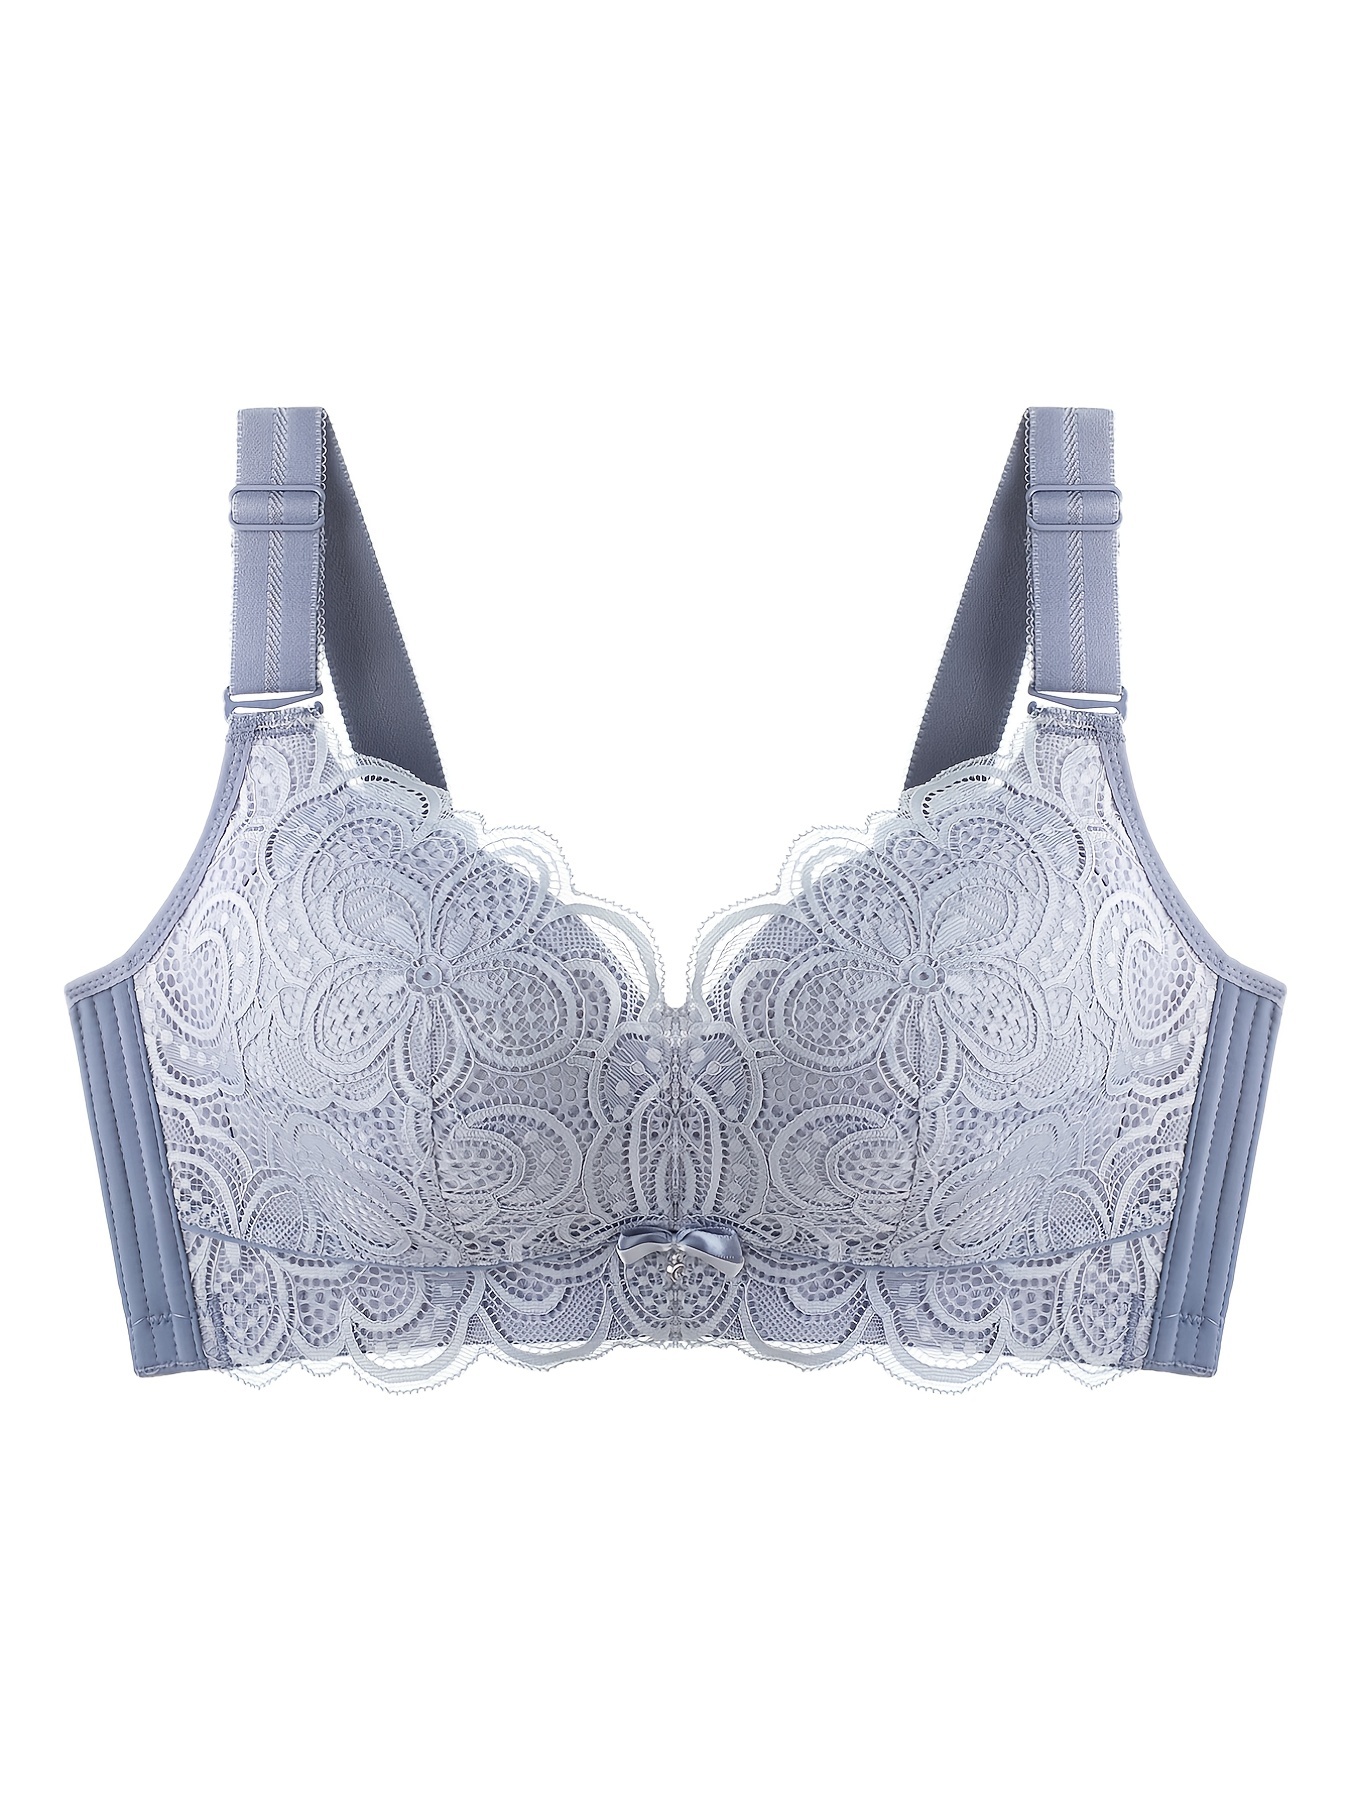 Super push-up bra - Collection Elegance by Leilieve